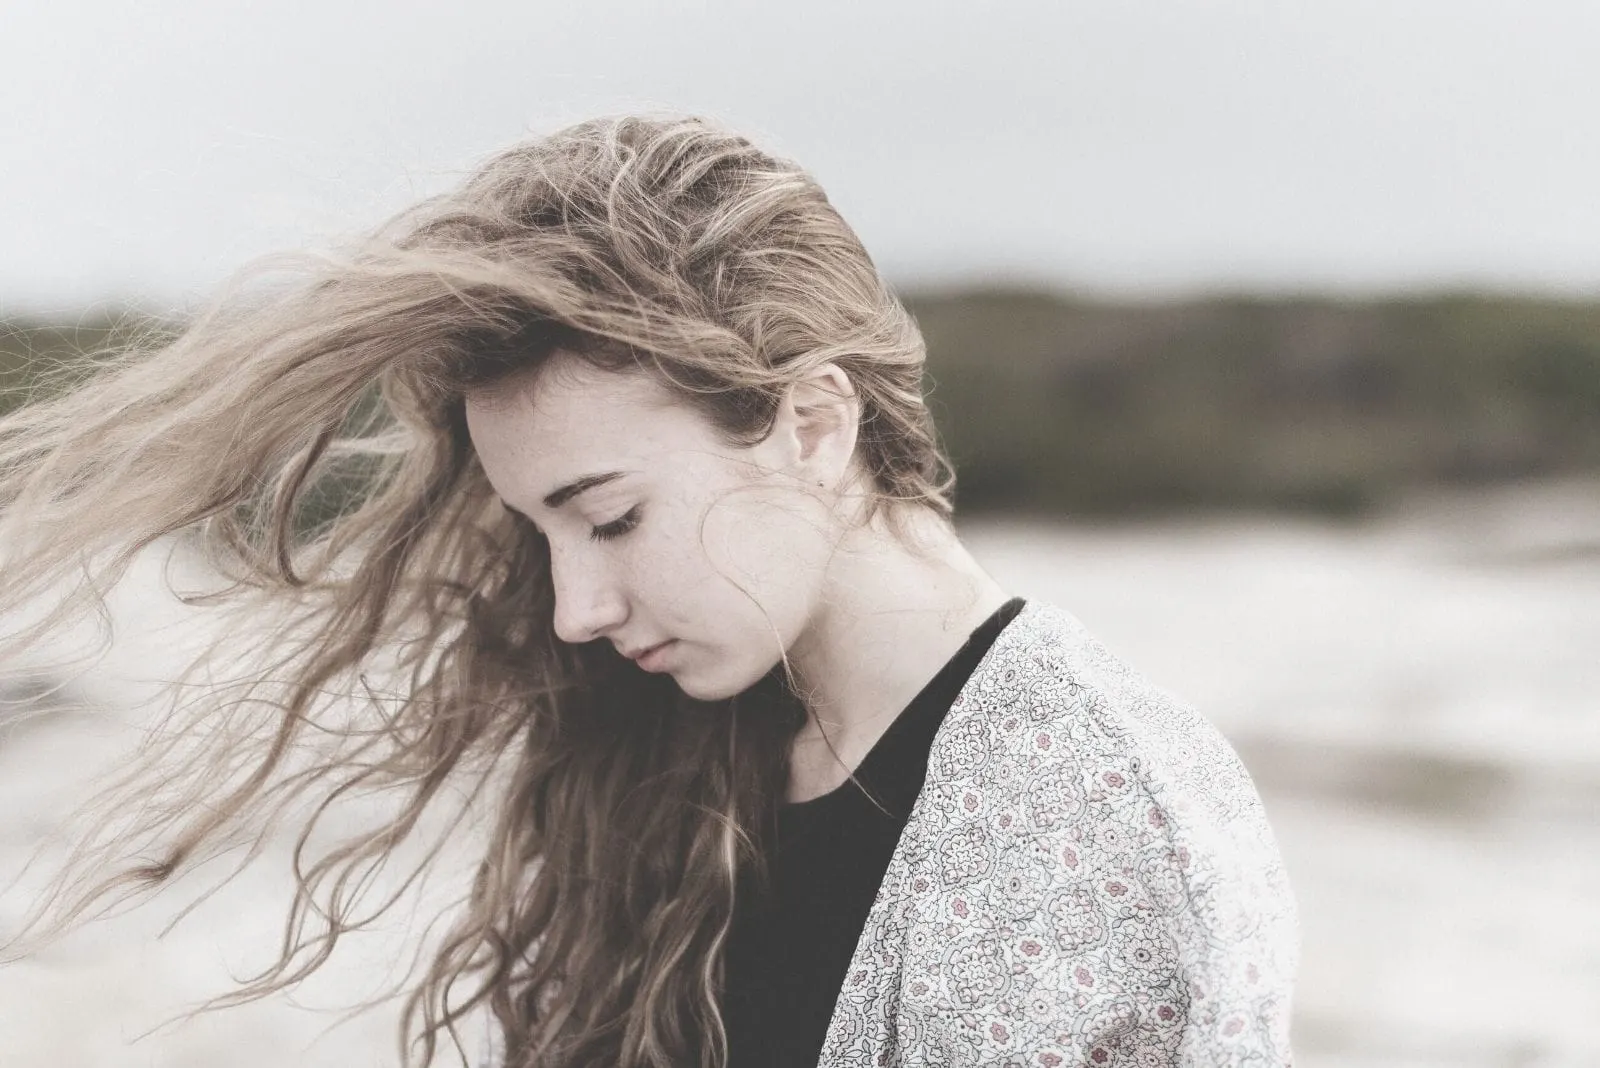 sad young woman near the beach walking with hair blown by the air bowing head